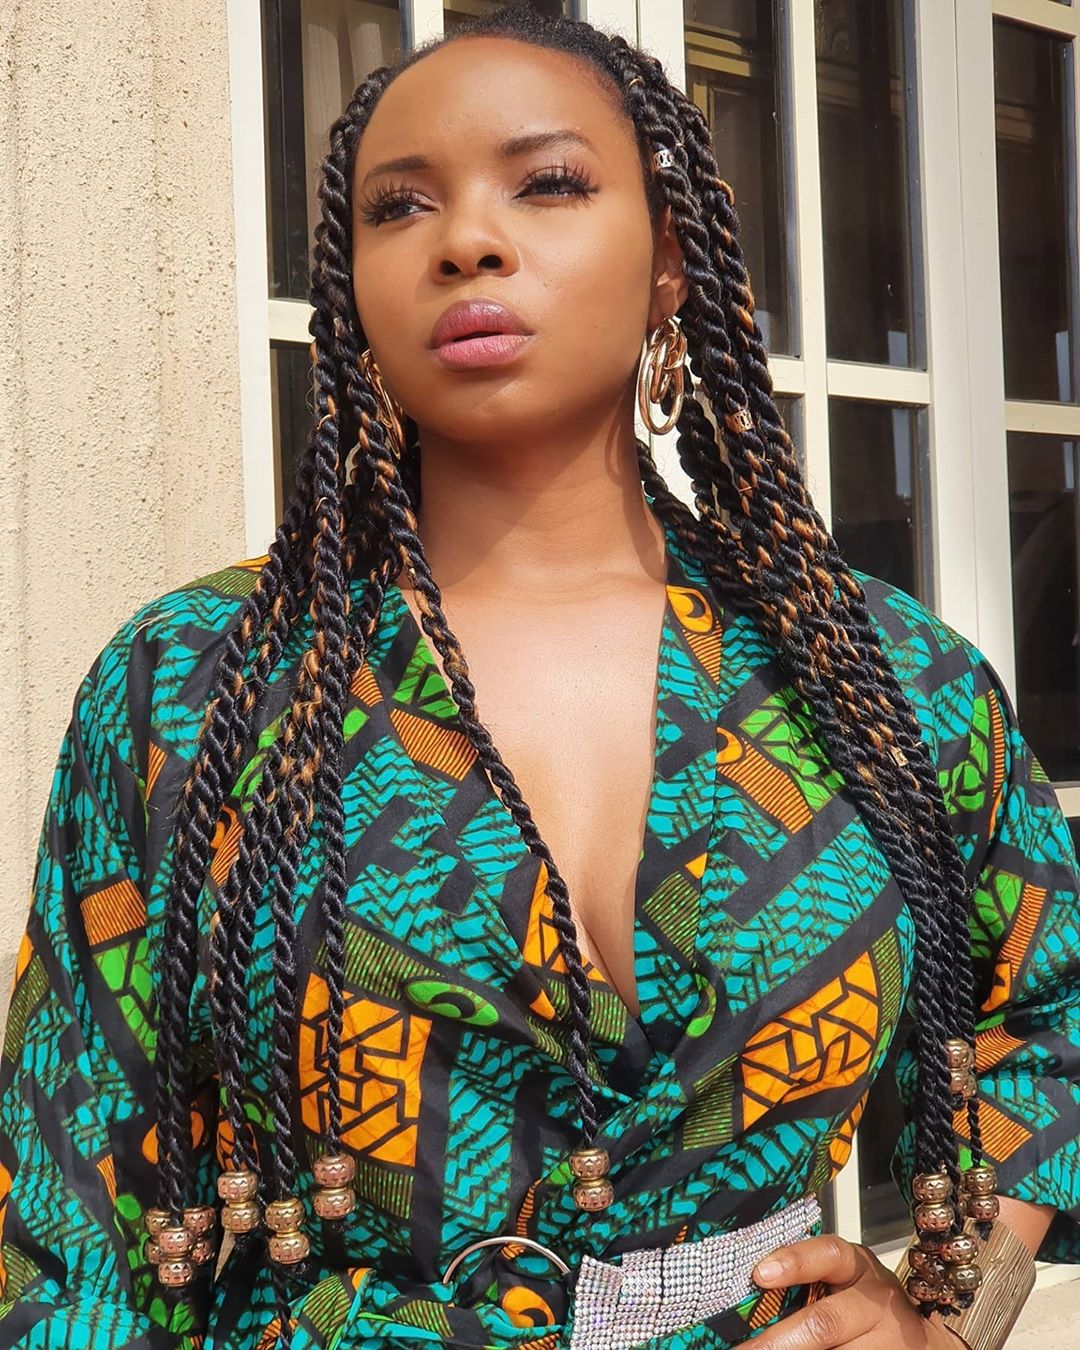 police-officers-breonna-taylor-not-charged-yemi-alade-undp-ambassador-mendy-chelsea-keeper-latest-news-global-world-stories-thursday-september-2020-style-rave